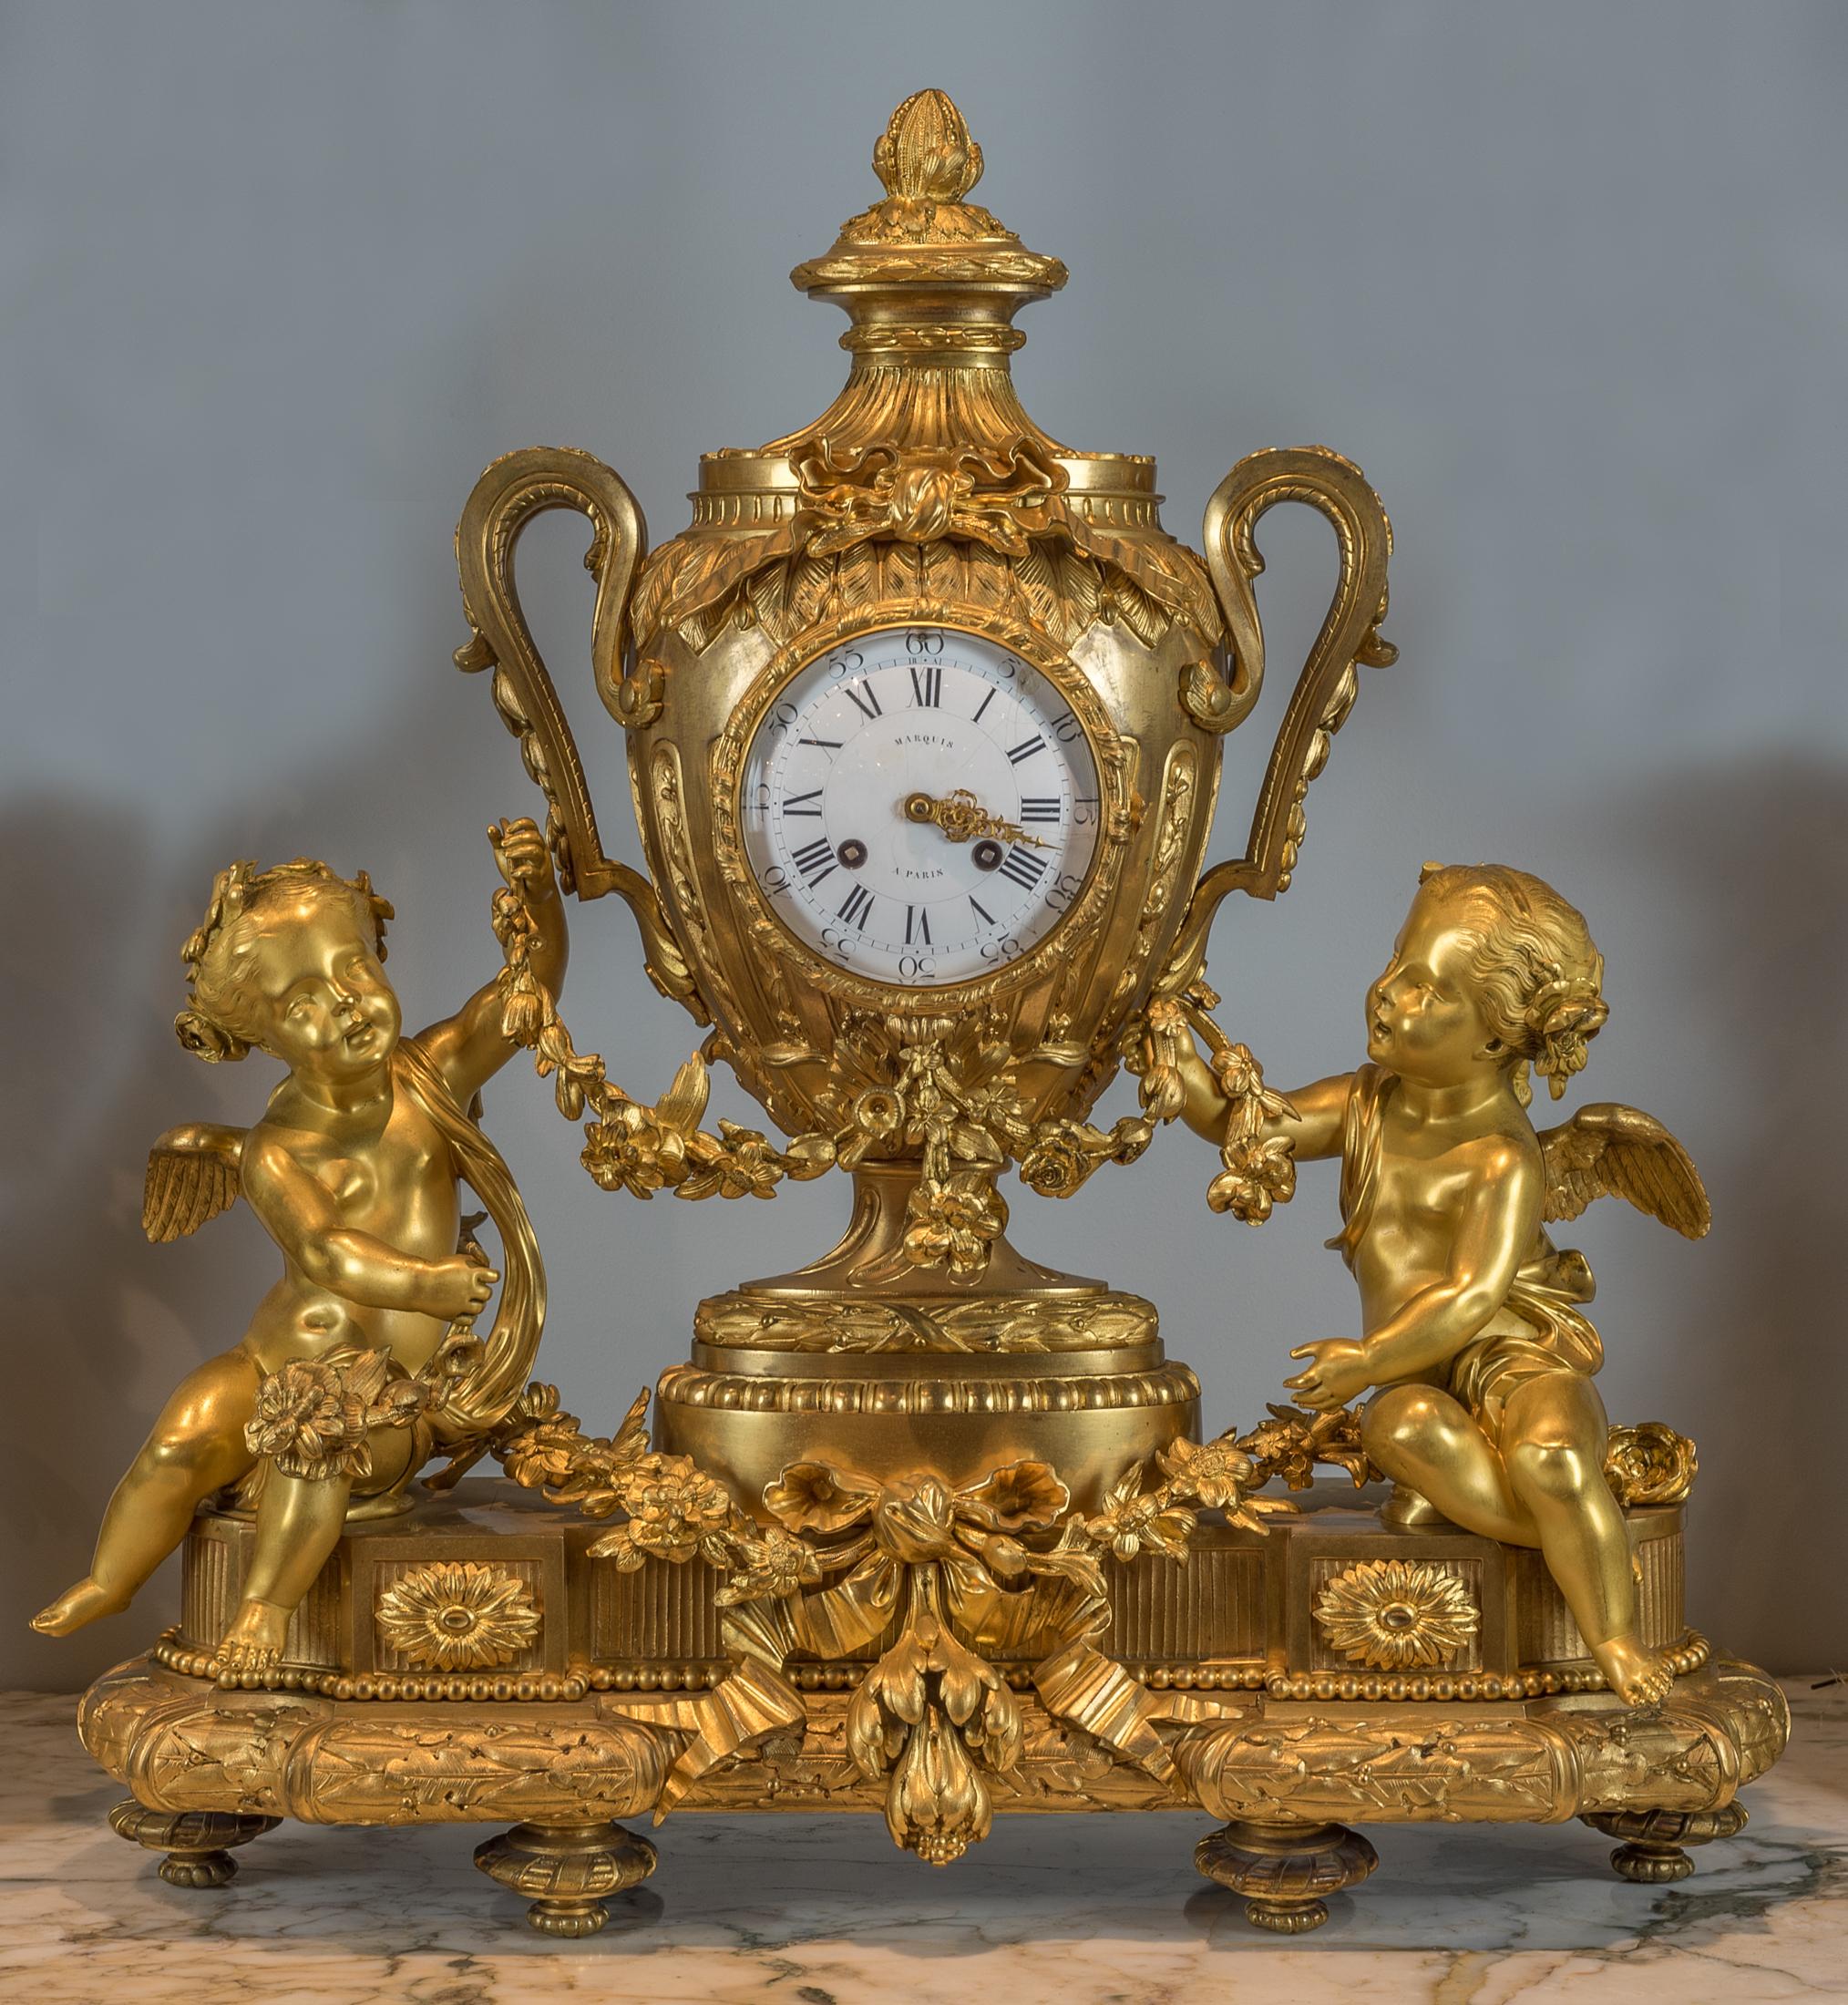 The enamel dial signed ‘Marquis à Paris’ standing on oval base with exceptionally elaborate decoration all over.

Origin: French
Date: 19th century
Dimension: (Clock) 27 inches high; (candelabra) 35 in x 17.5 in.